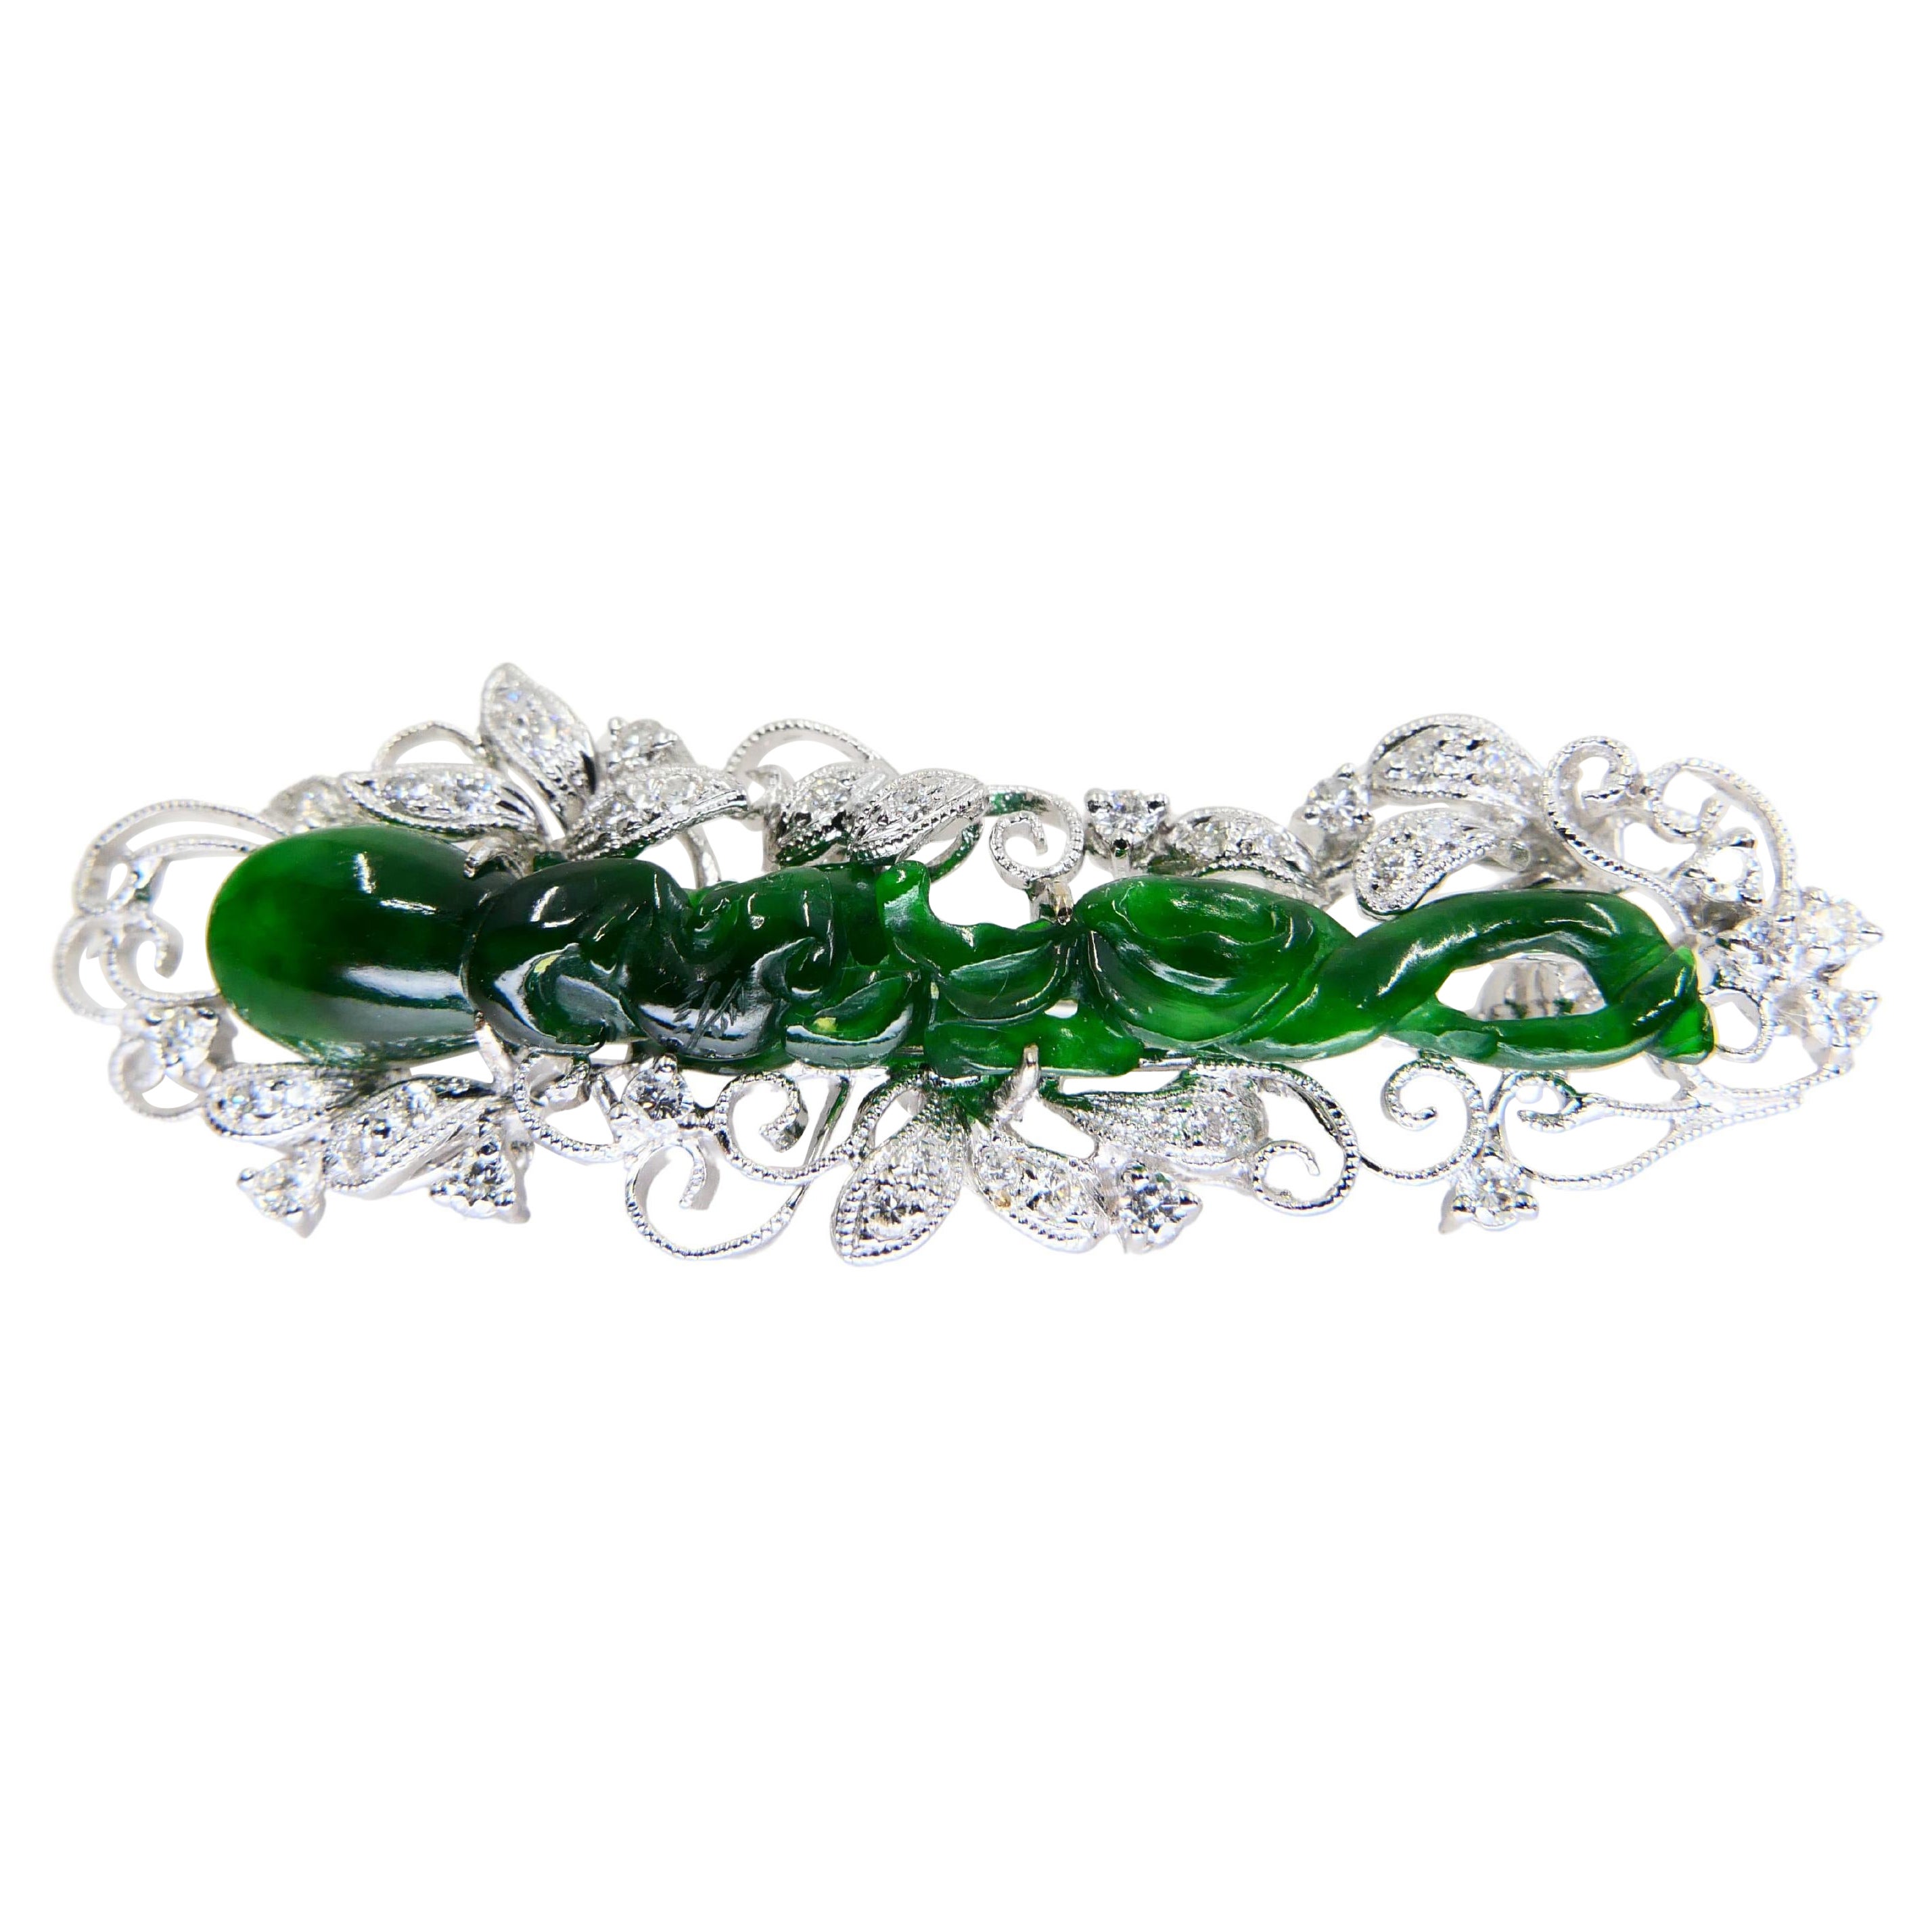 Certified Intense Green Carved Jade & Diamond Brooch, Close to Imperial Green For Sale